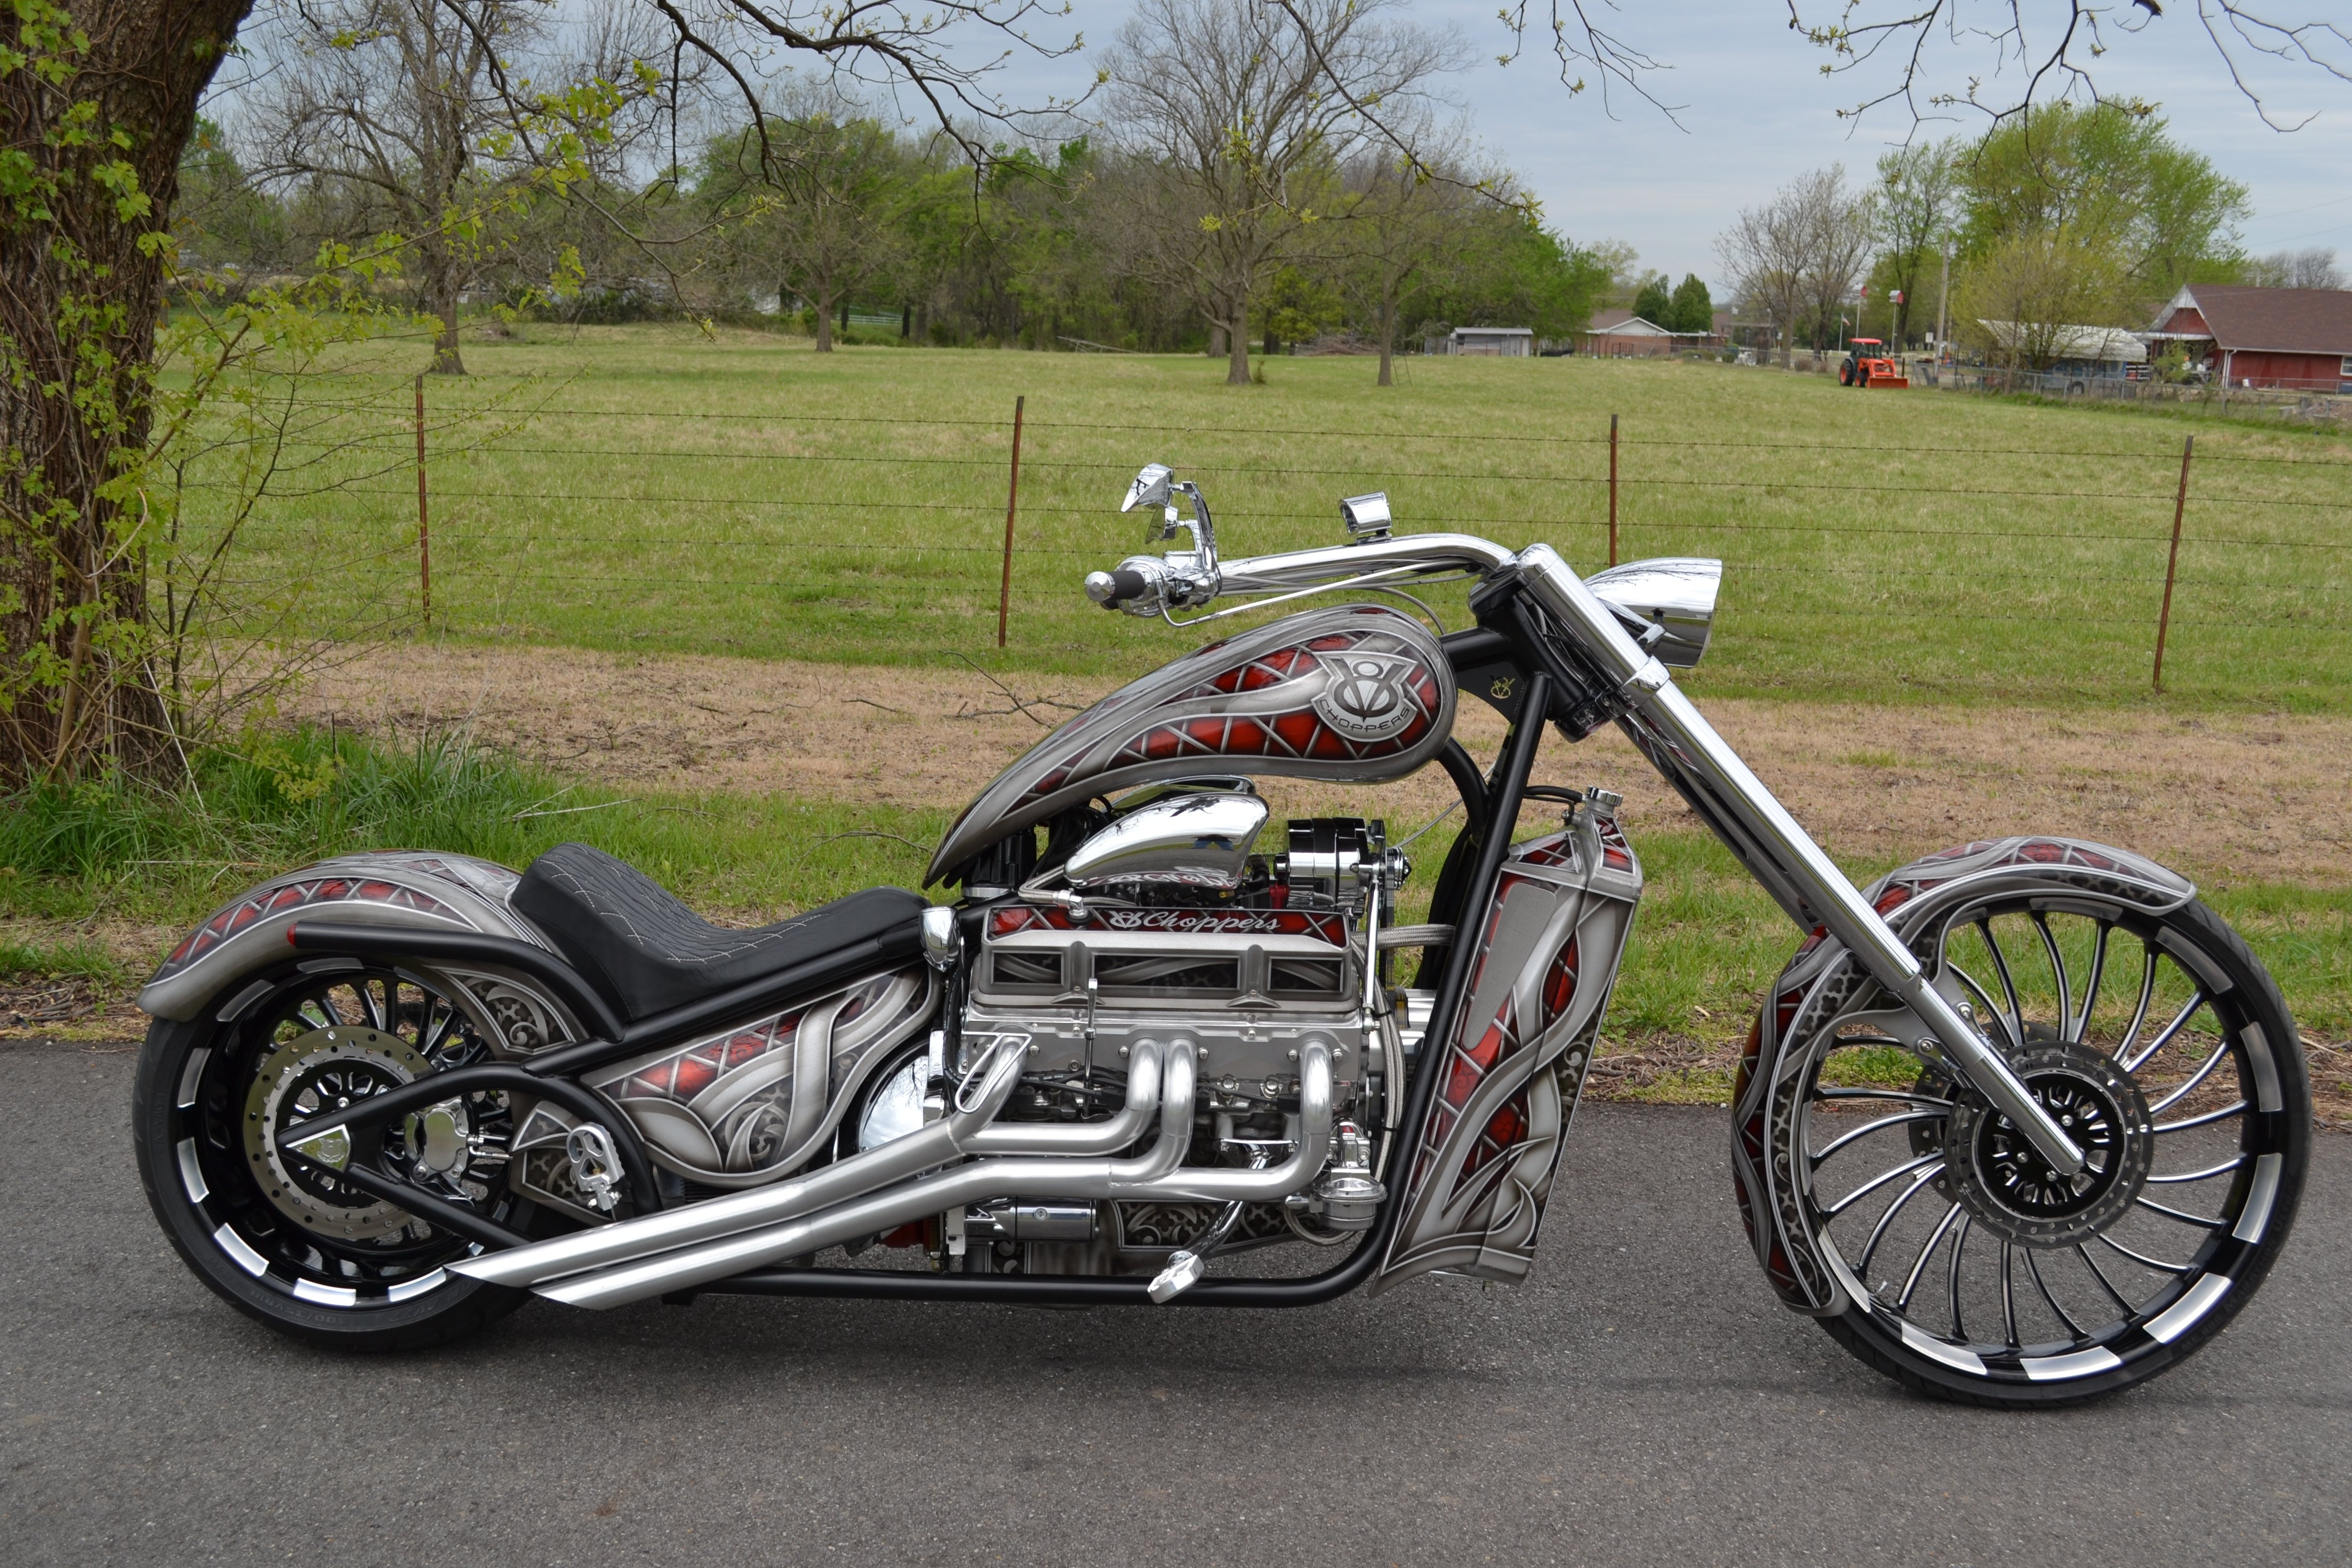 Hot Rod And Motorcycle